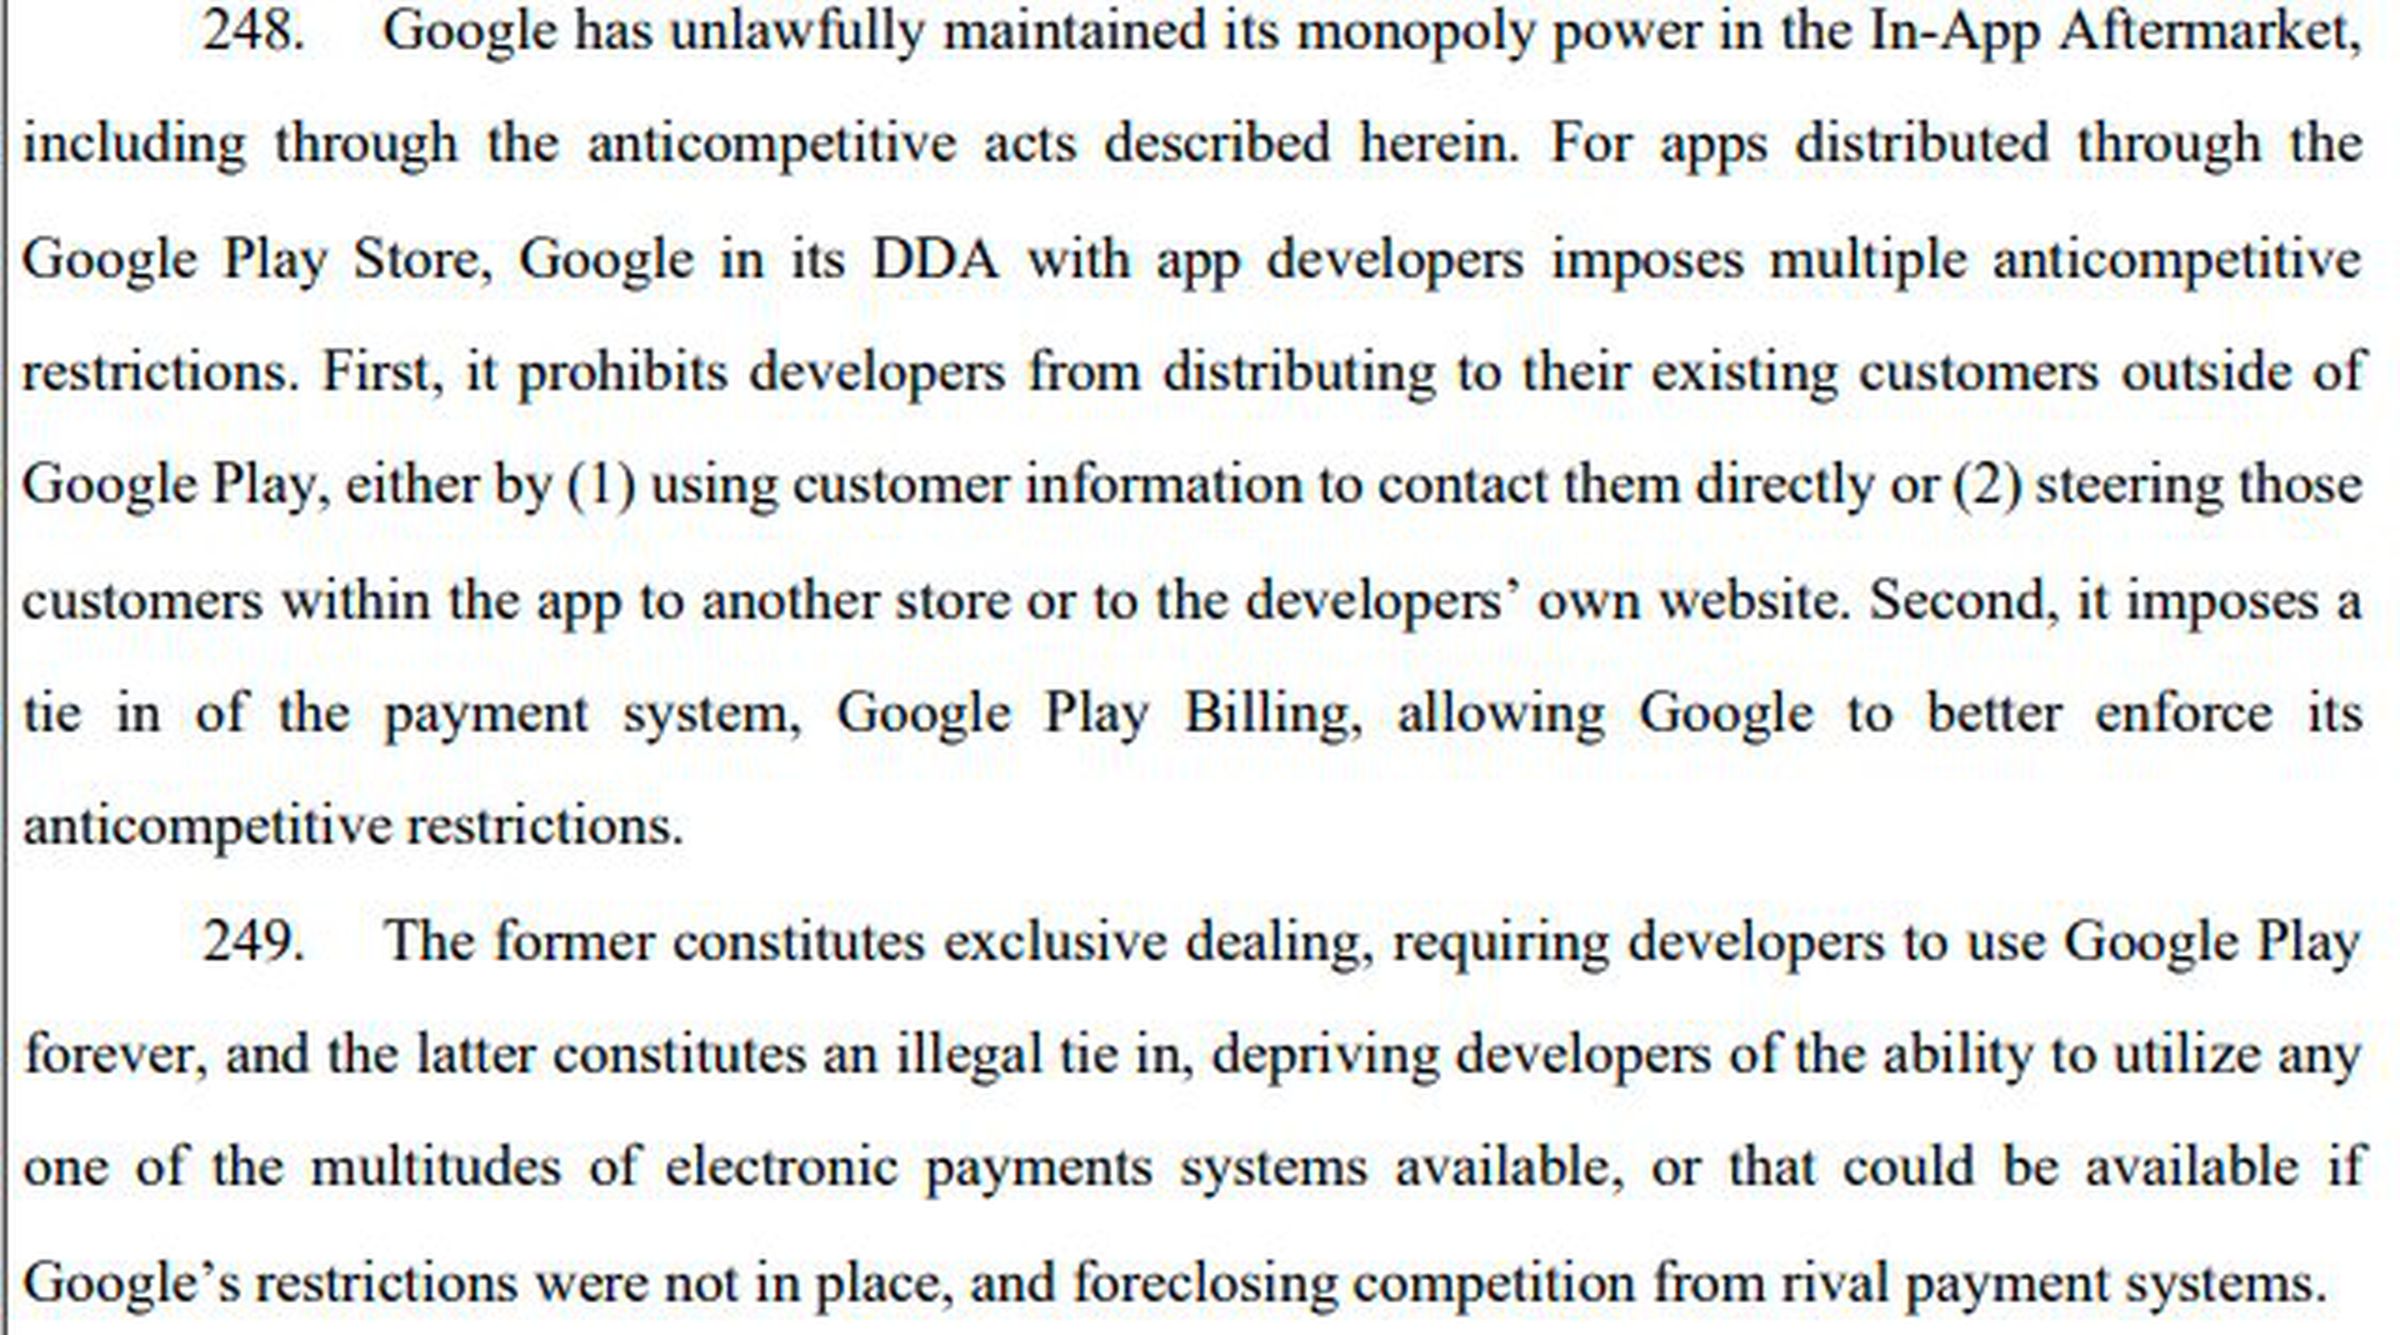 For apps distributed through the Google Play Store, Google in its DDA with app developers imposes multiple anticompetitive restrictions. First, it prohibits developers from distributing to their existing customers outside of Google Play, either by (1) using customer information to contact them directly or (2) steering those customers within the app to another store or to the developers’ own website.